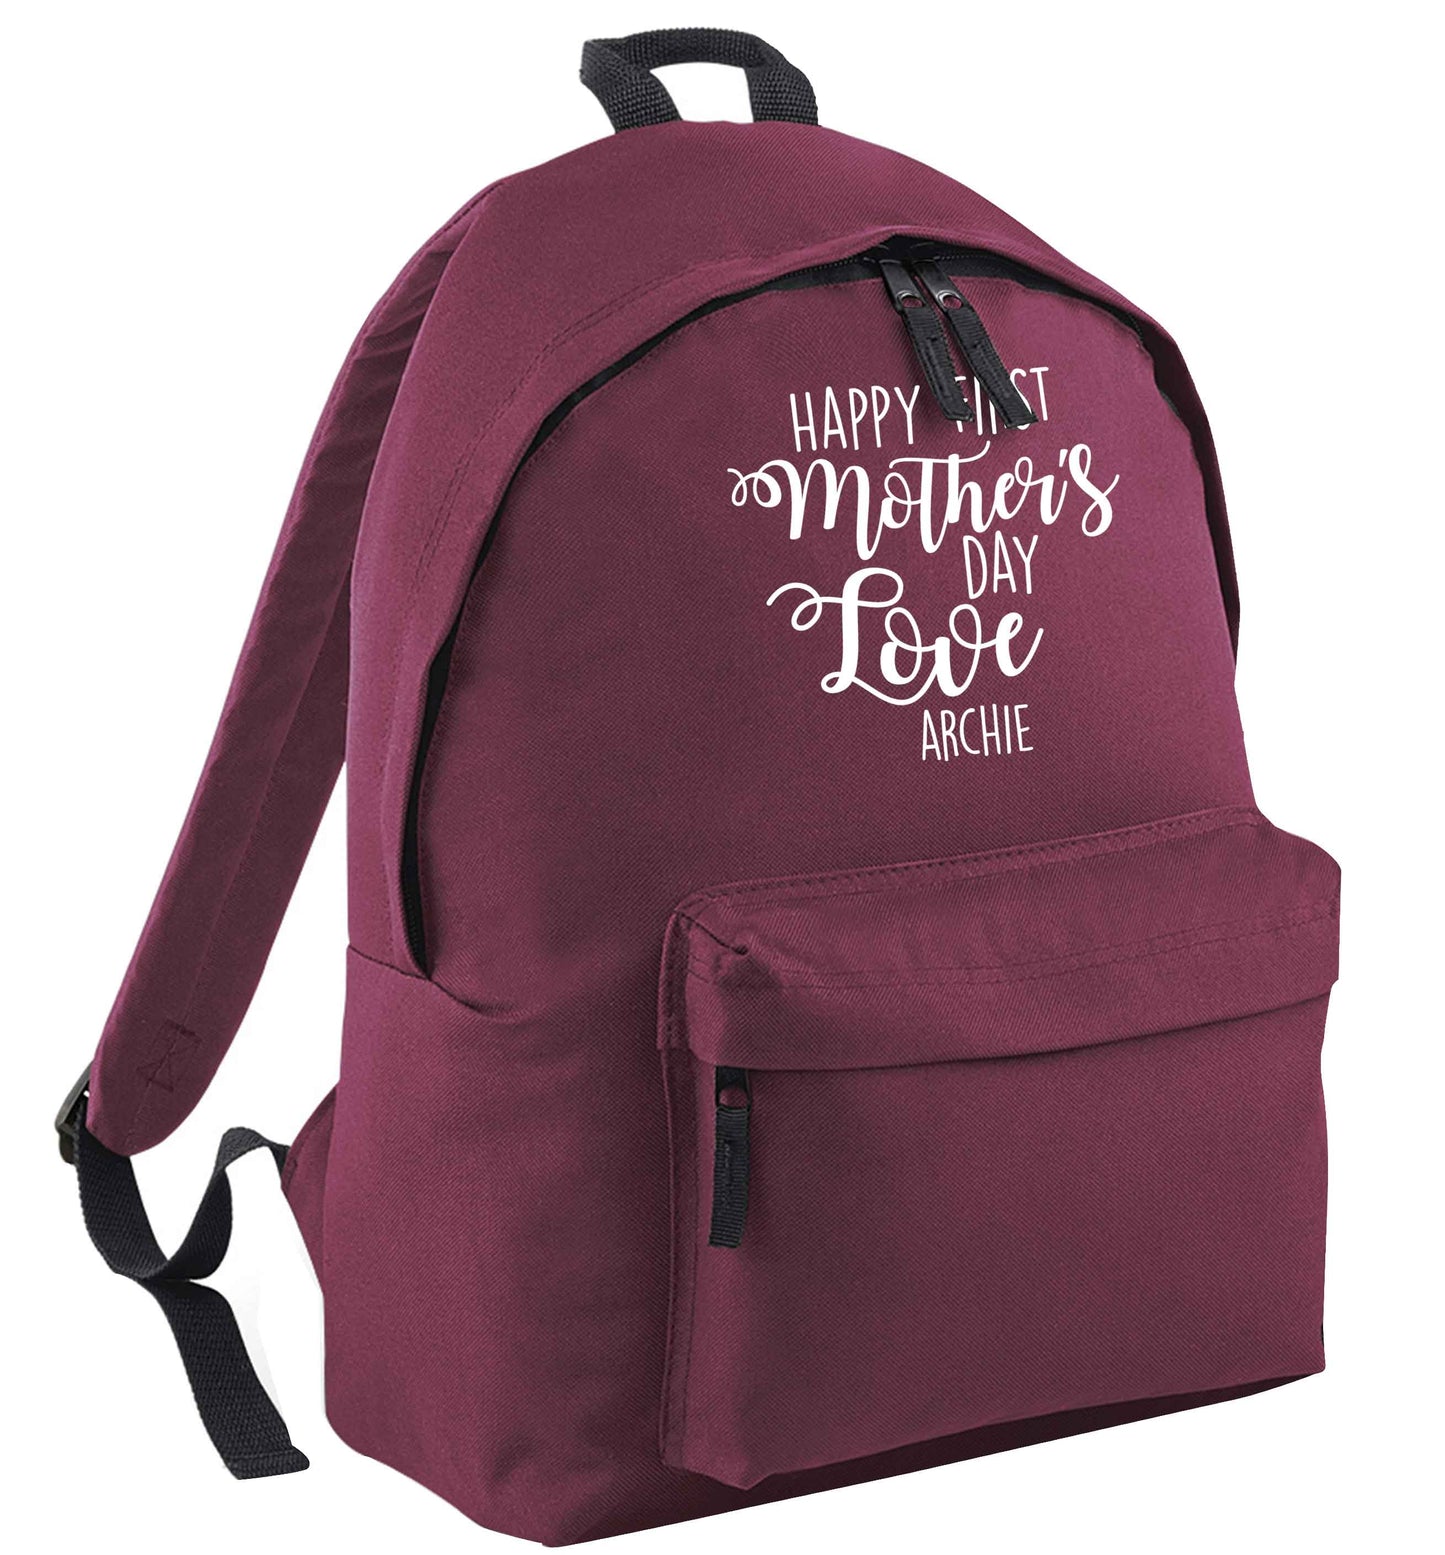 Mummy's first mother's day! black childrens backpack